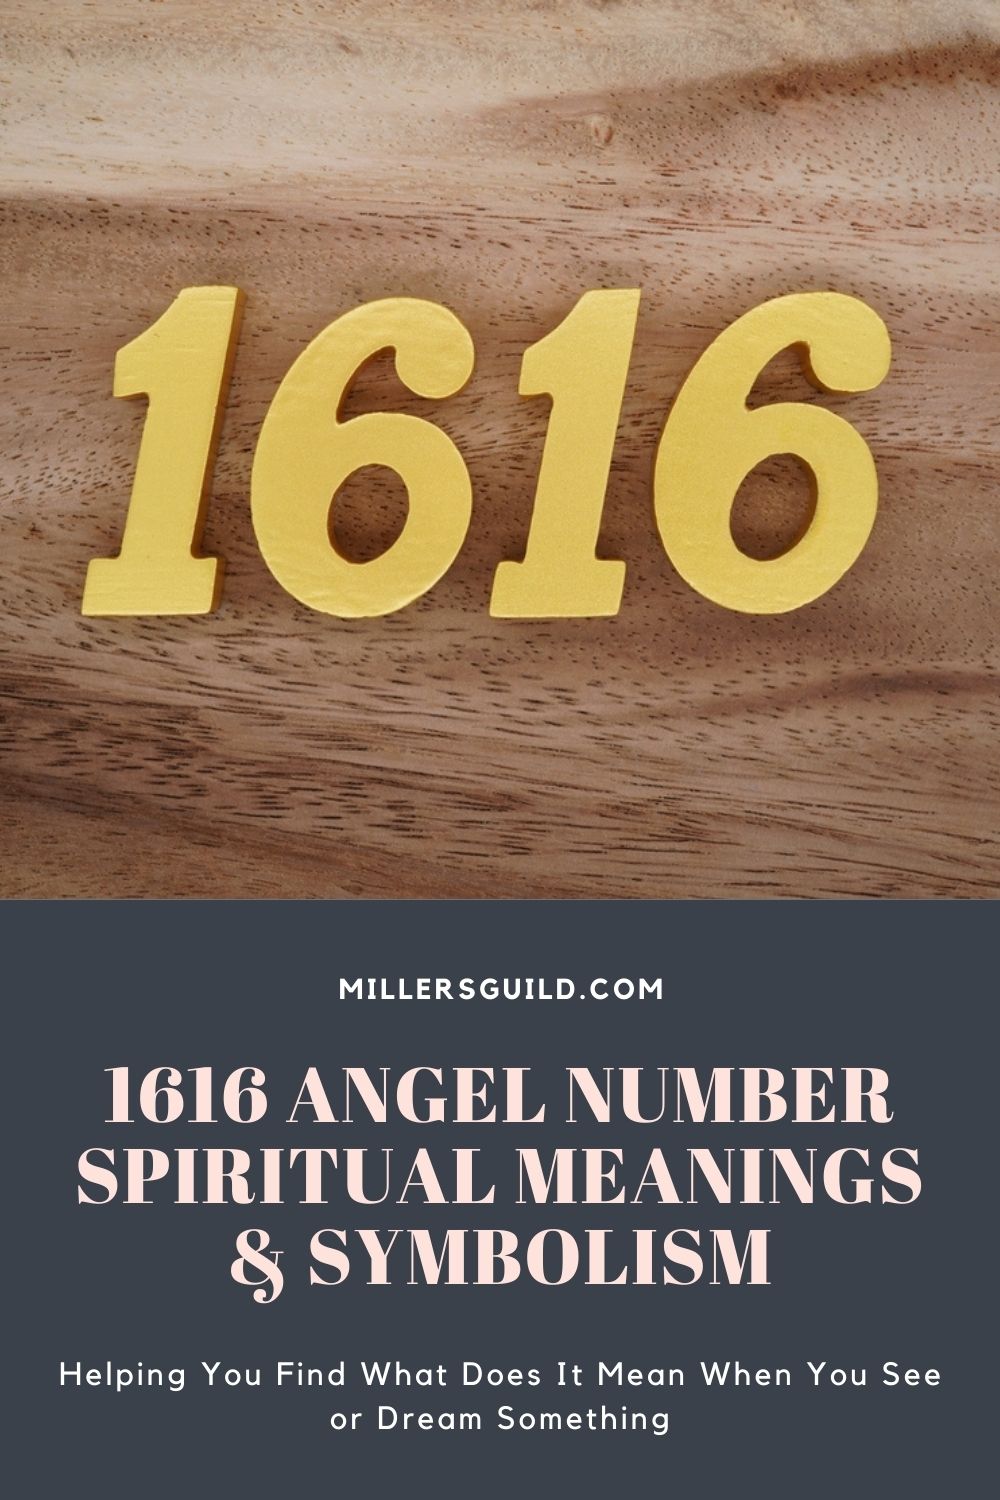 1616 Angel Number Spiritual Meanings & Symbolism 2